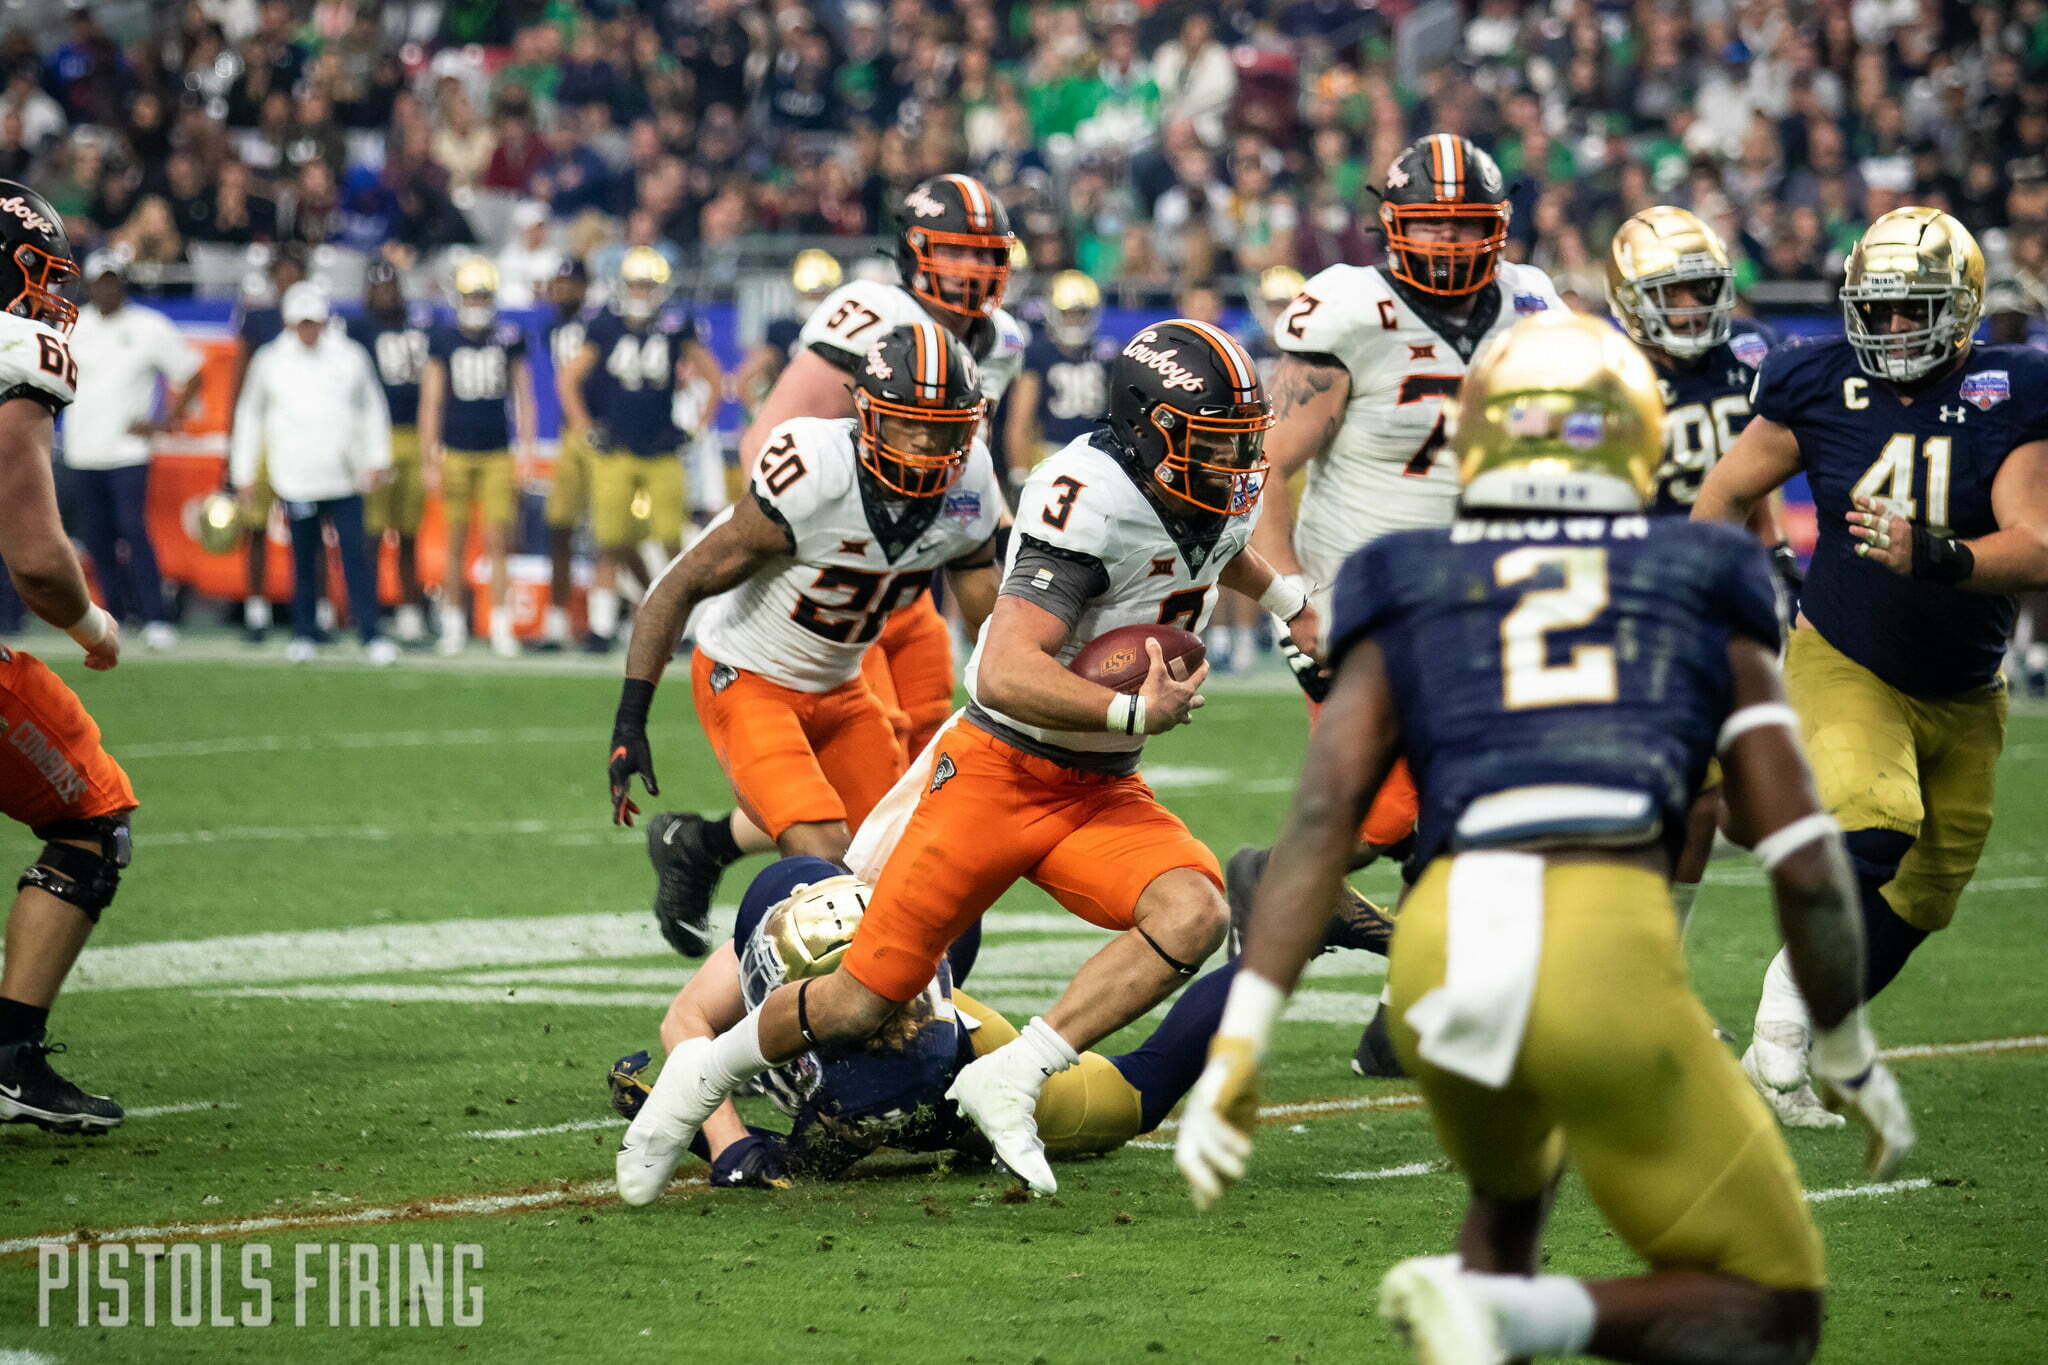 PFB’s Best Photos from Oklahoma State’s Fiesta Bowl Victory against